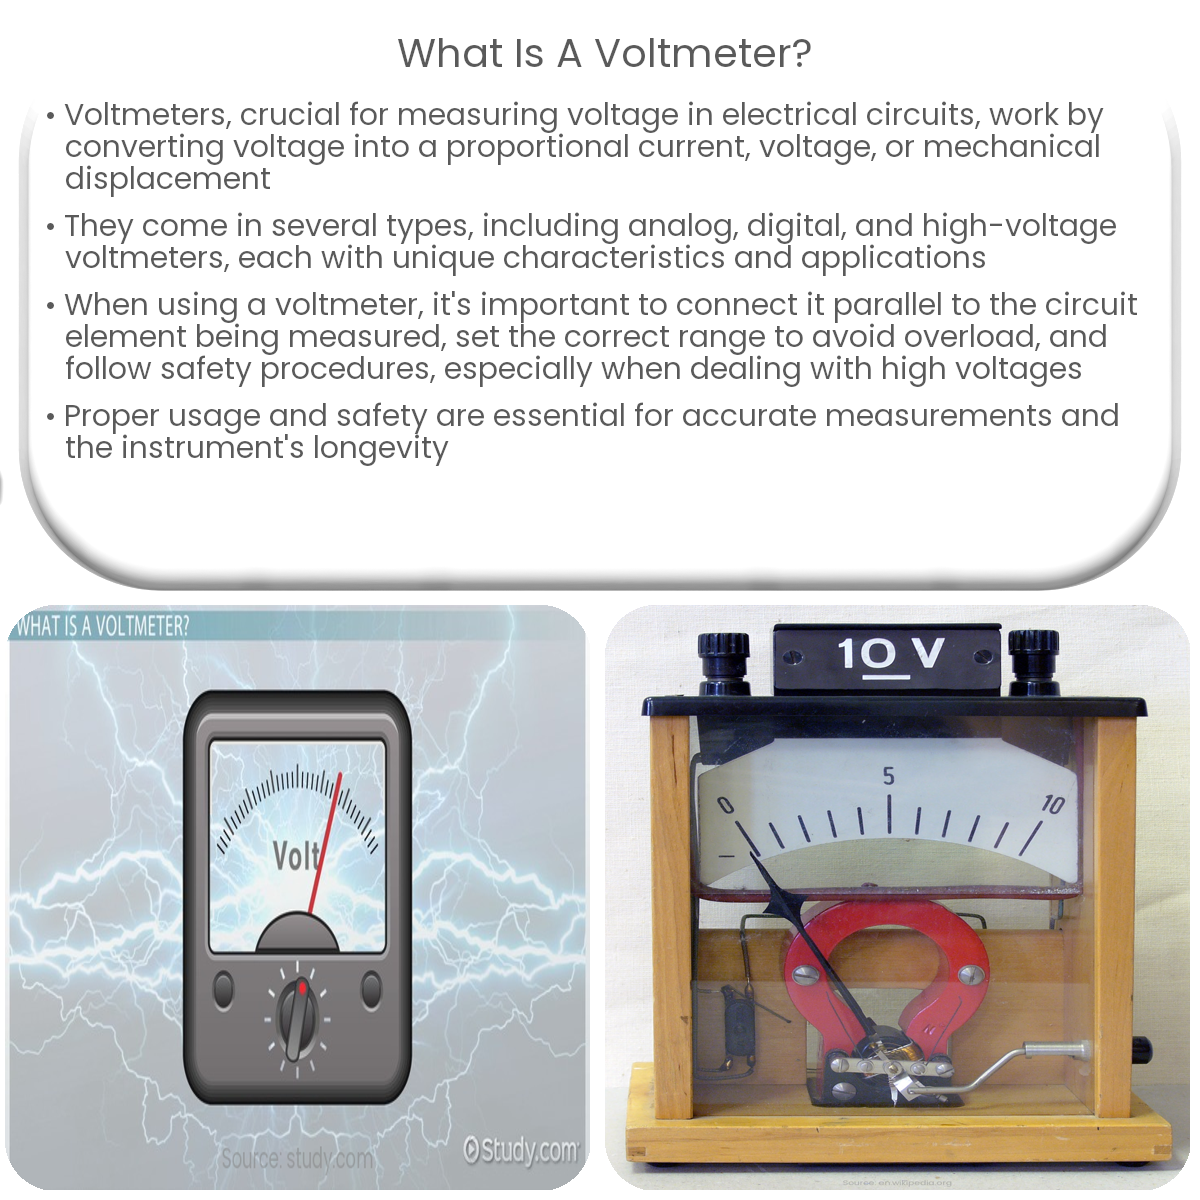 What is a voltmeter?